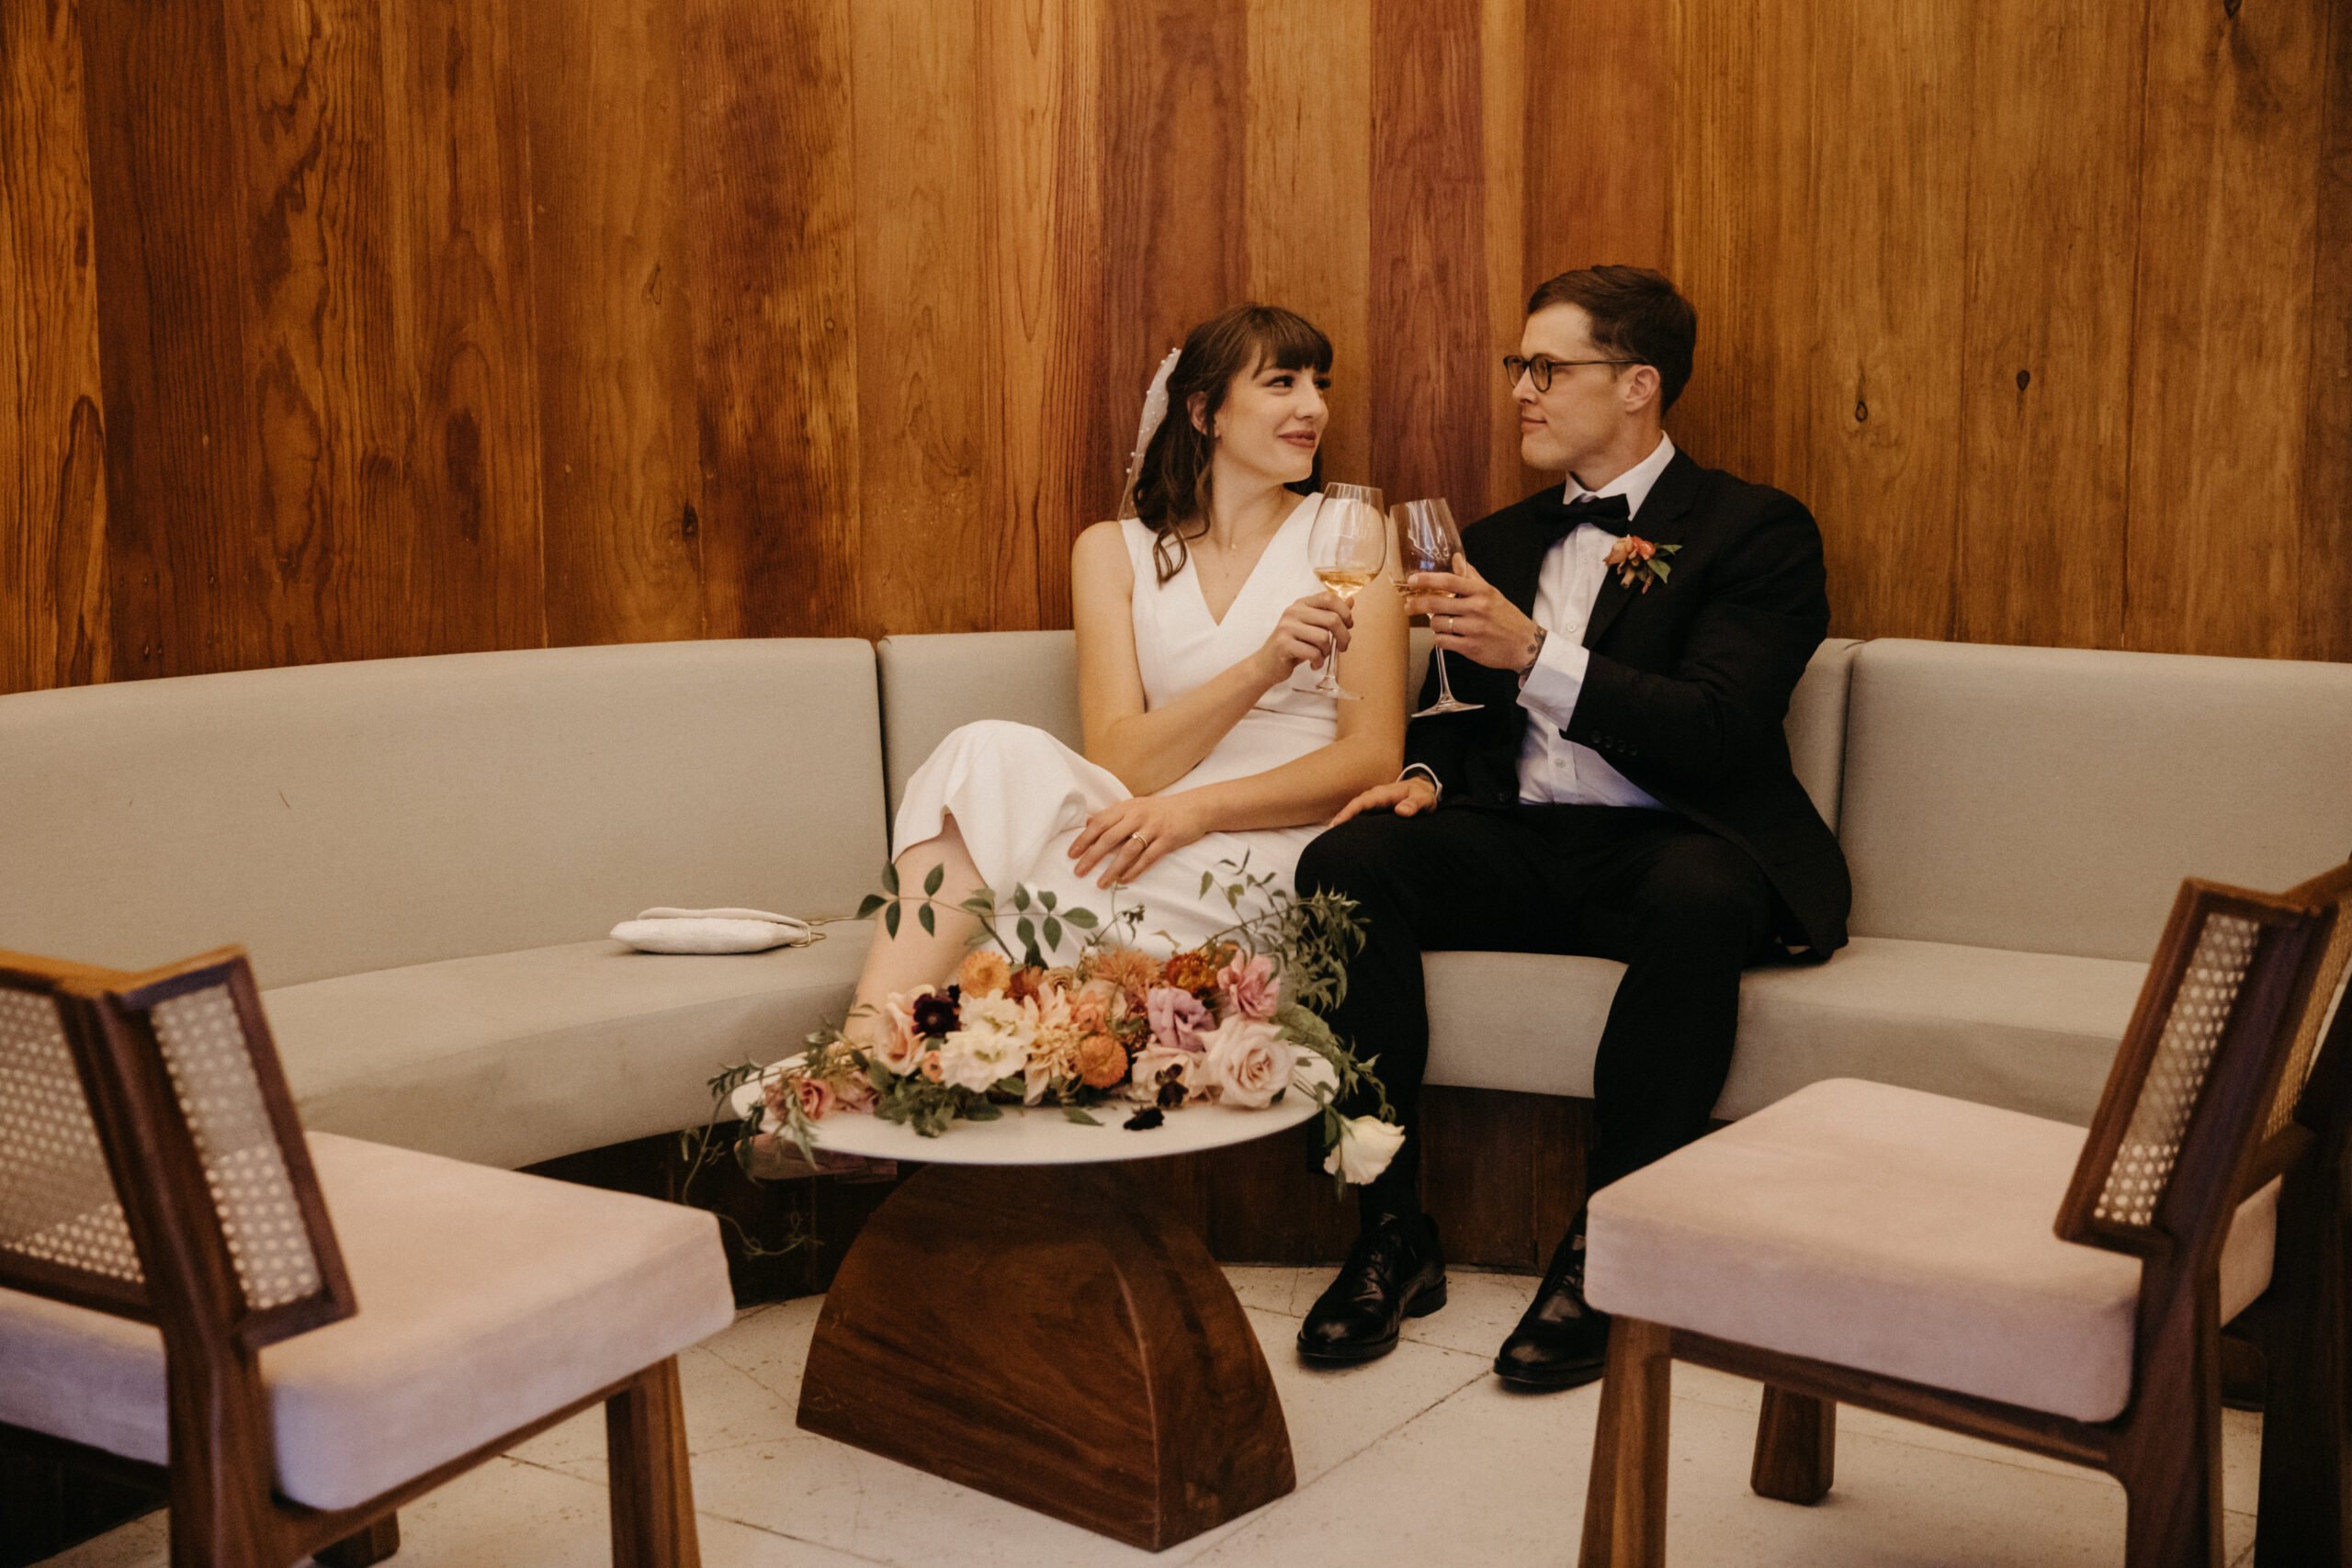 Stunning bride and groom share champagne 